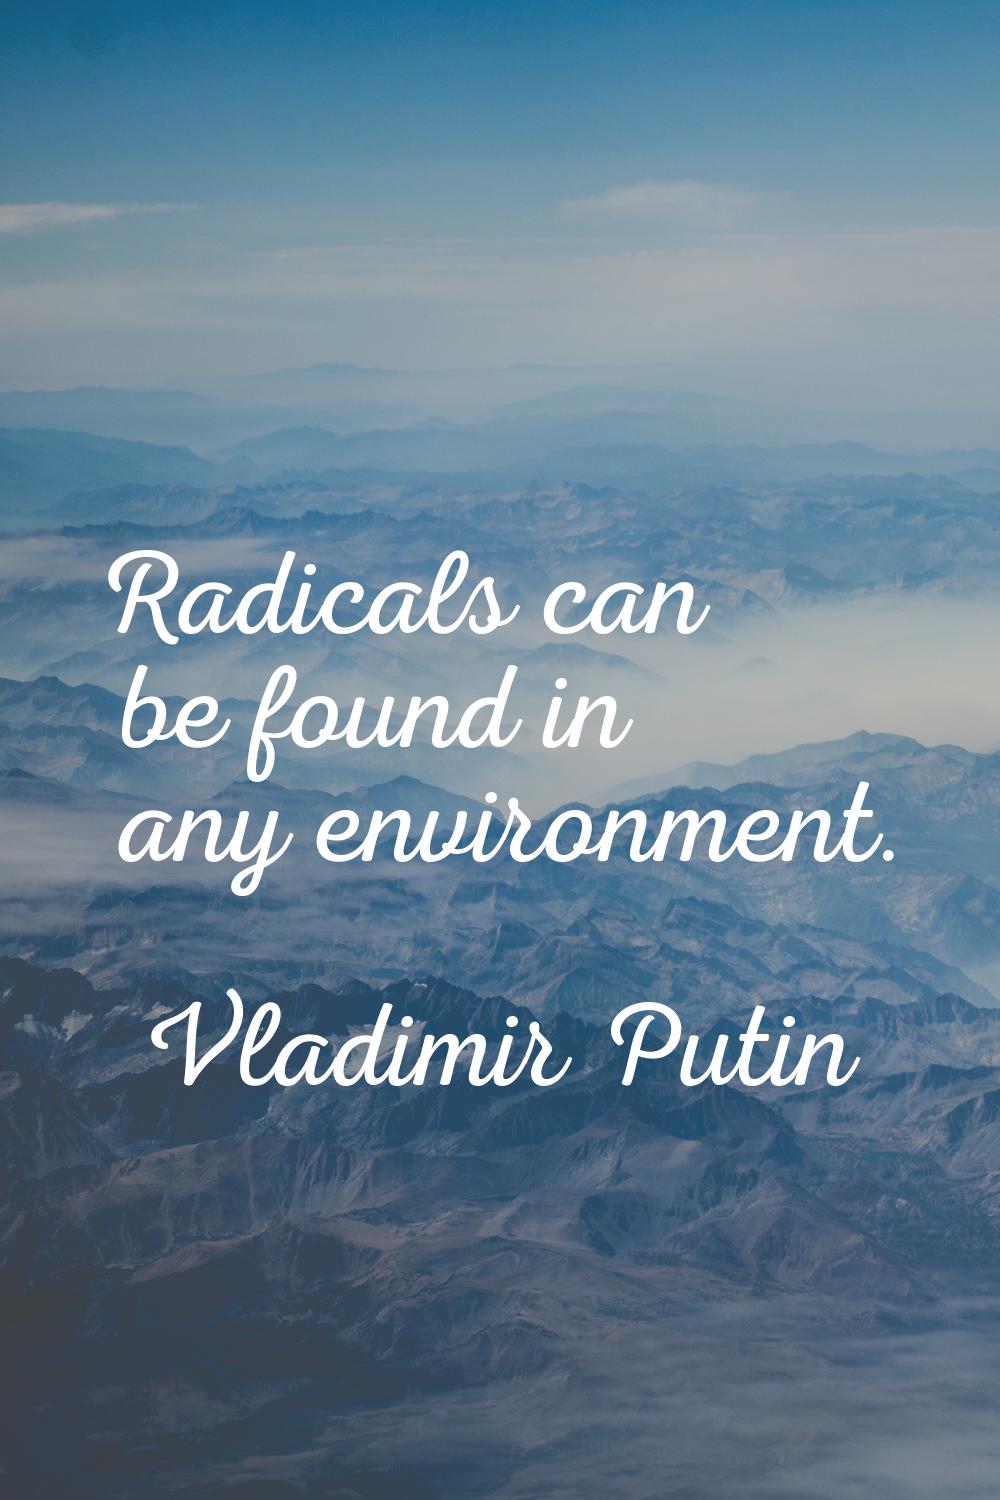 Radicals can be found in any environment.